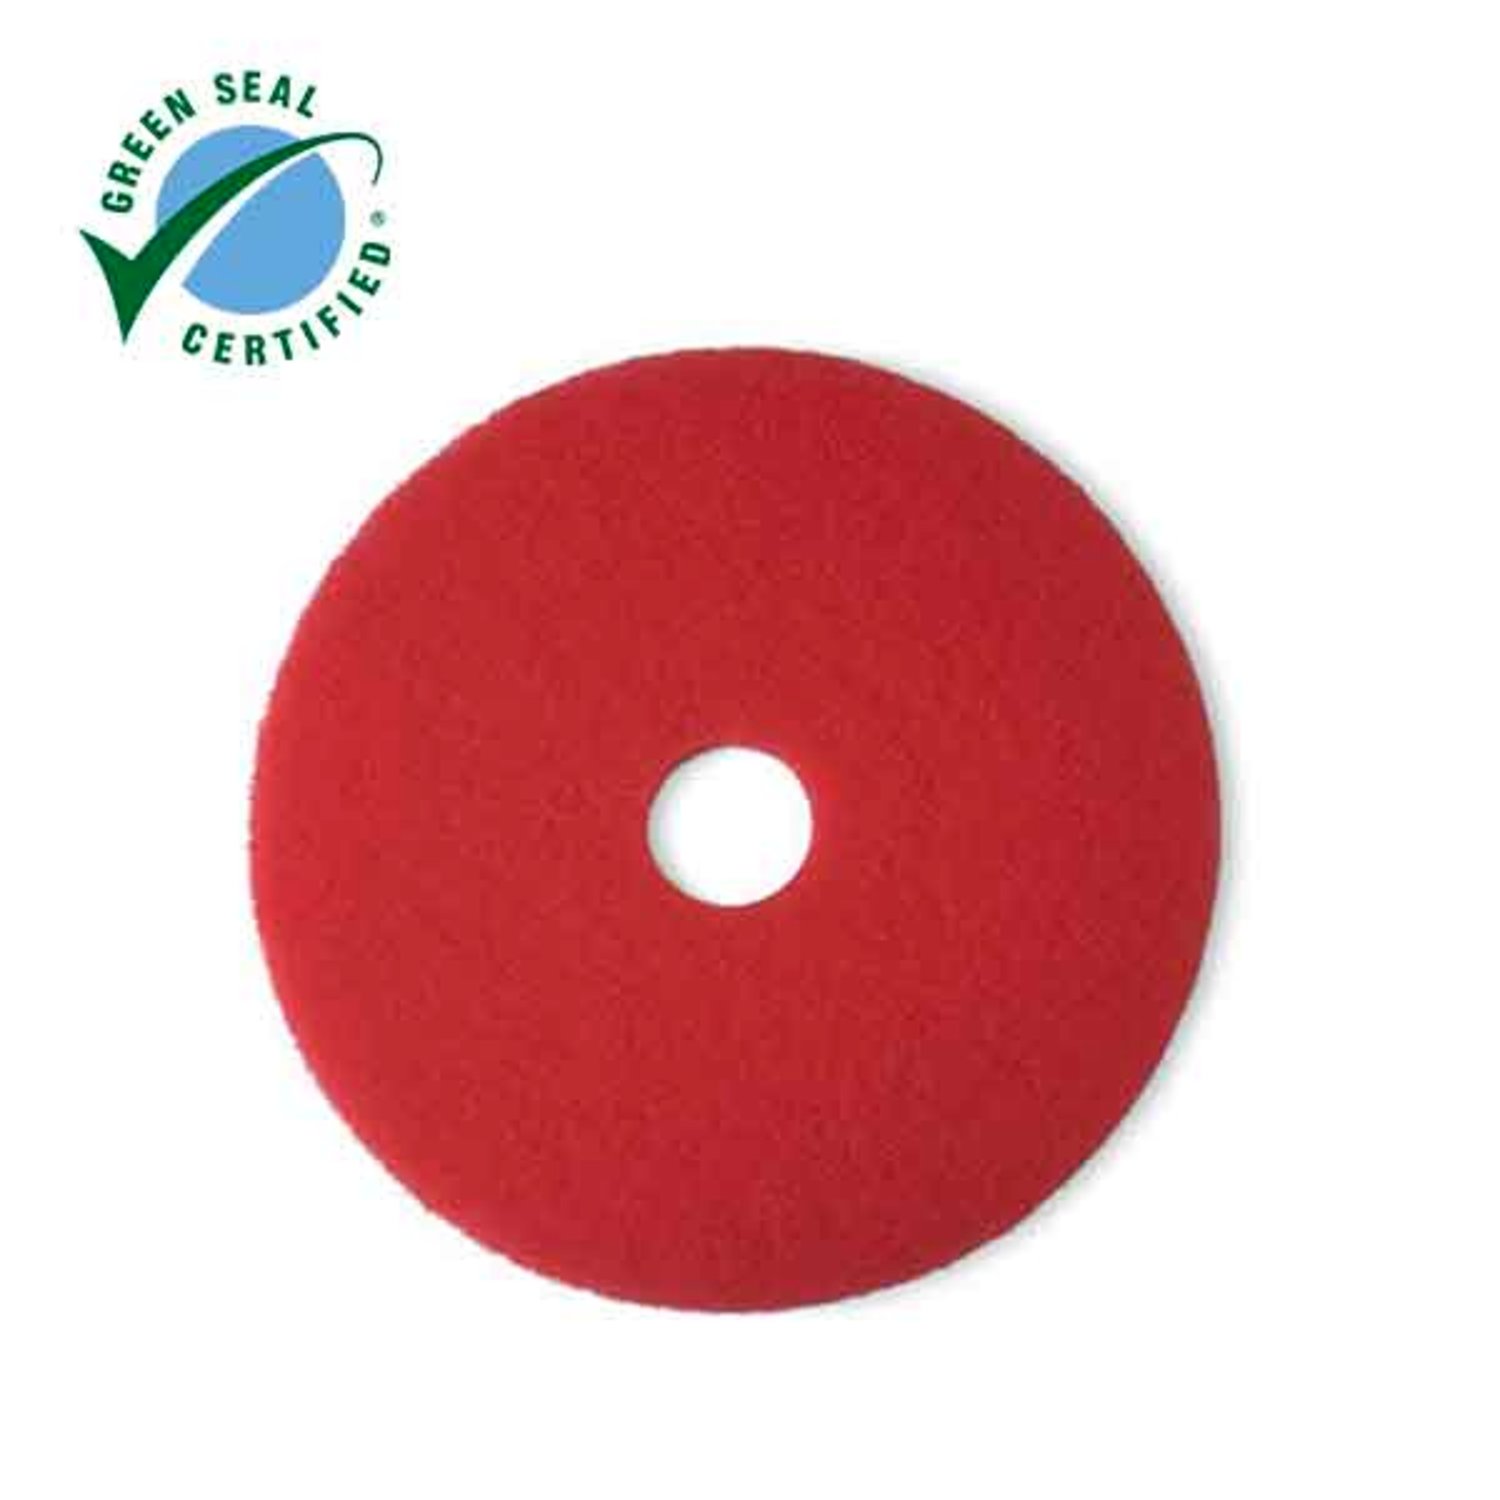 7000000677 - 3M Red Buffer Pad 5100, Red, 330 mm x 82 mm, 13 in, 5 ea/Case